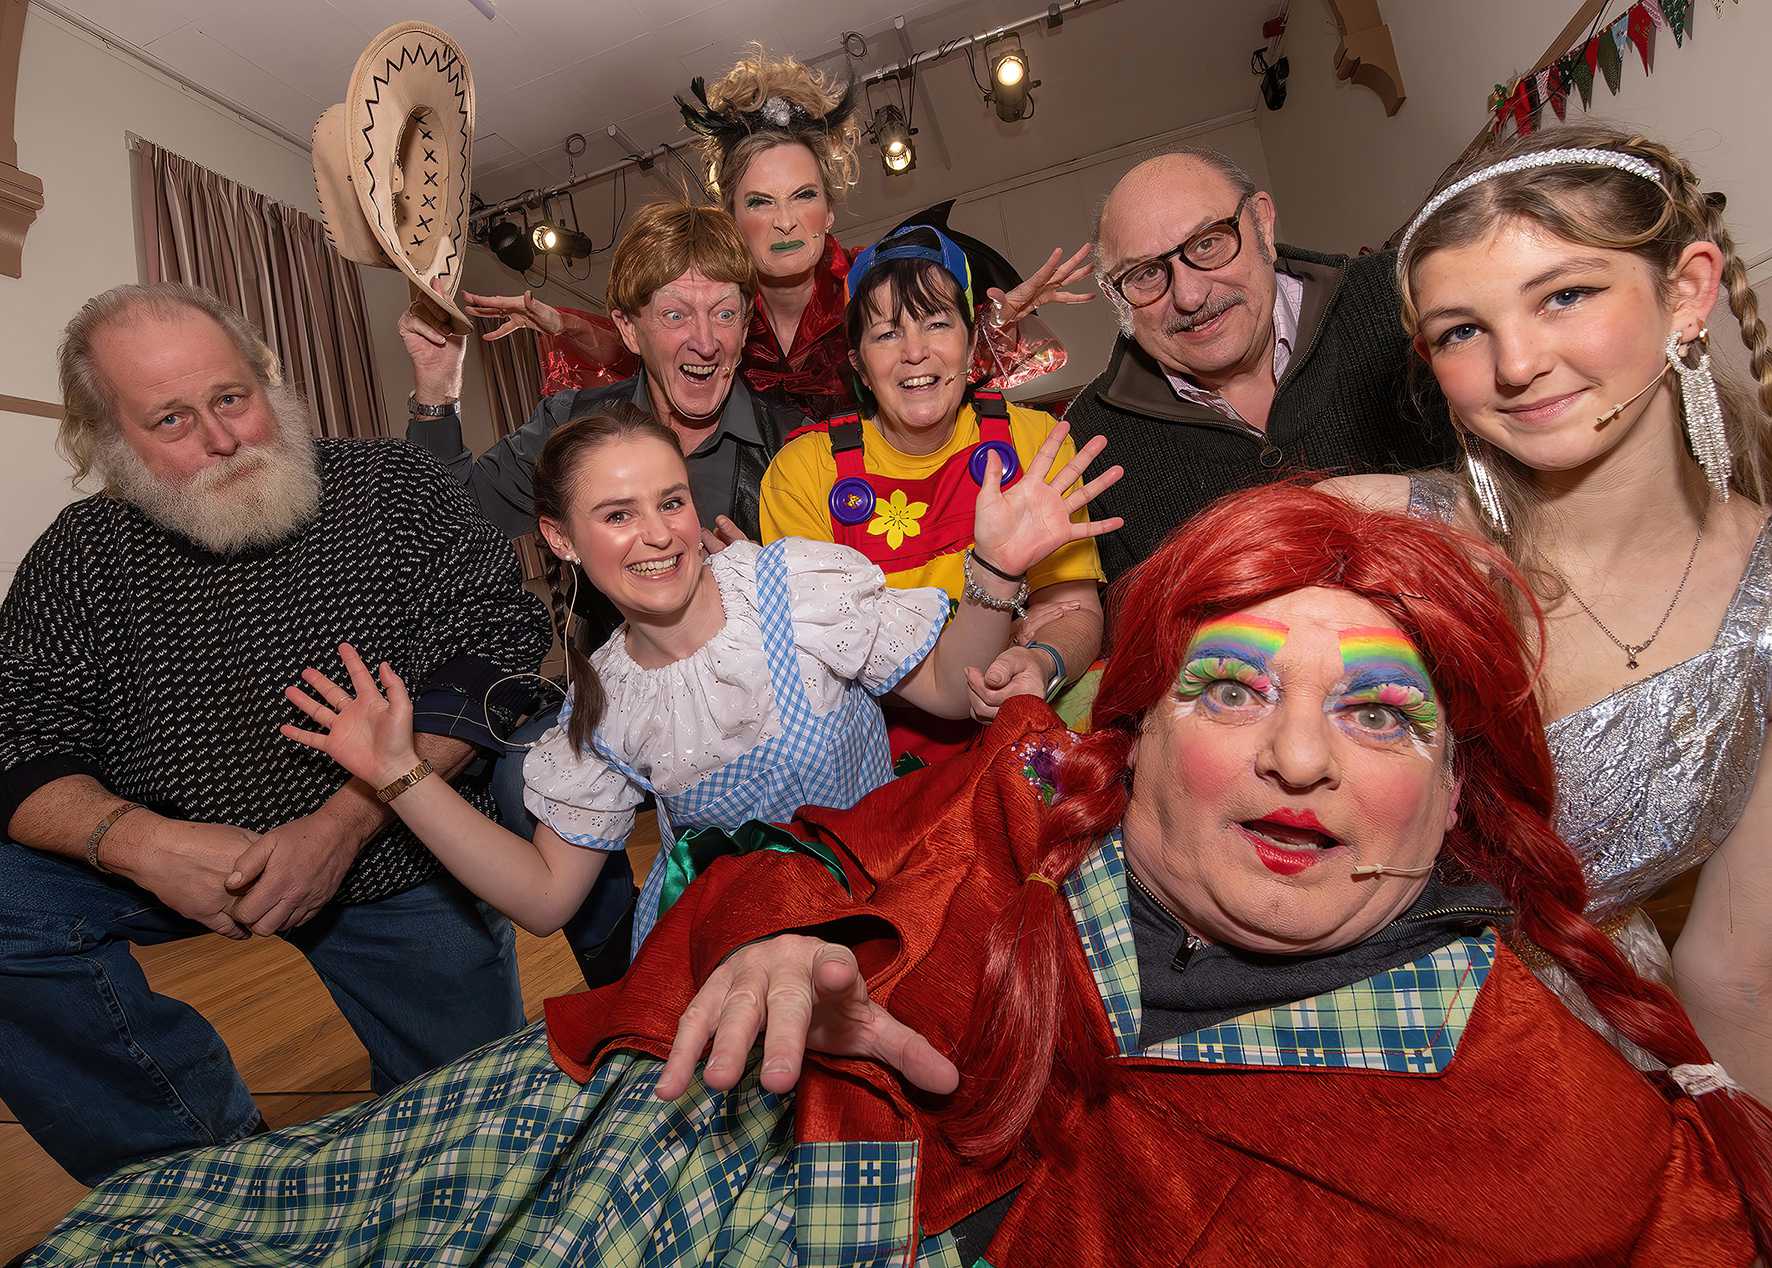 Cllr Arnold Warneken (left) and Cllr Andy Paraskos (right) with Tockwith Players in their Wizard of Wilstrop pantomime costumes and wearing their new headset mics, (from left) Sandra Adlington, Geoff Farnworth, Karen Coombes, Sue Corbett, David Hardman and Ellie Triffitt